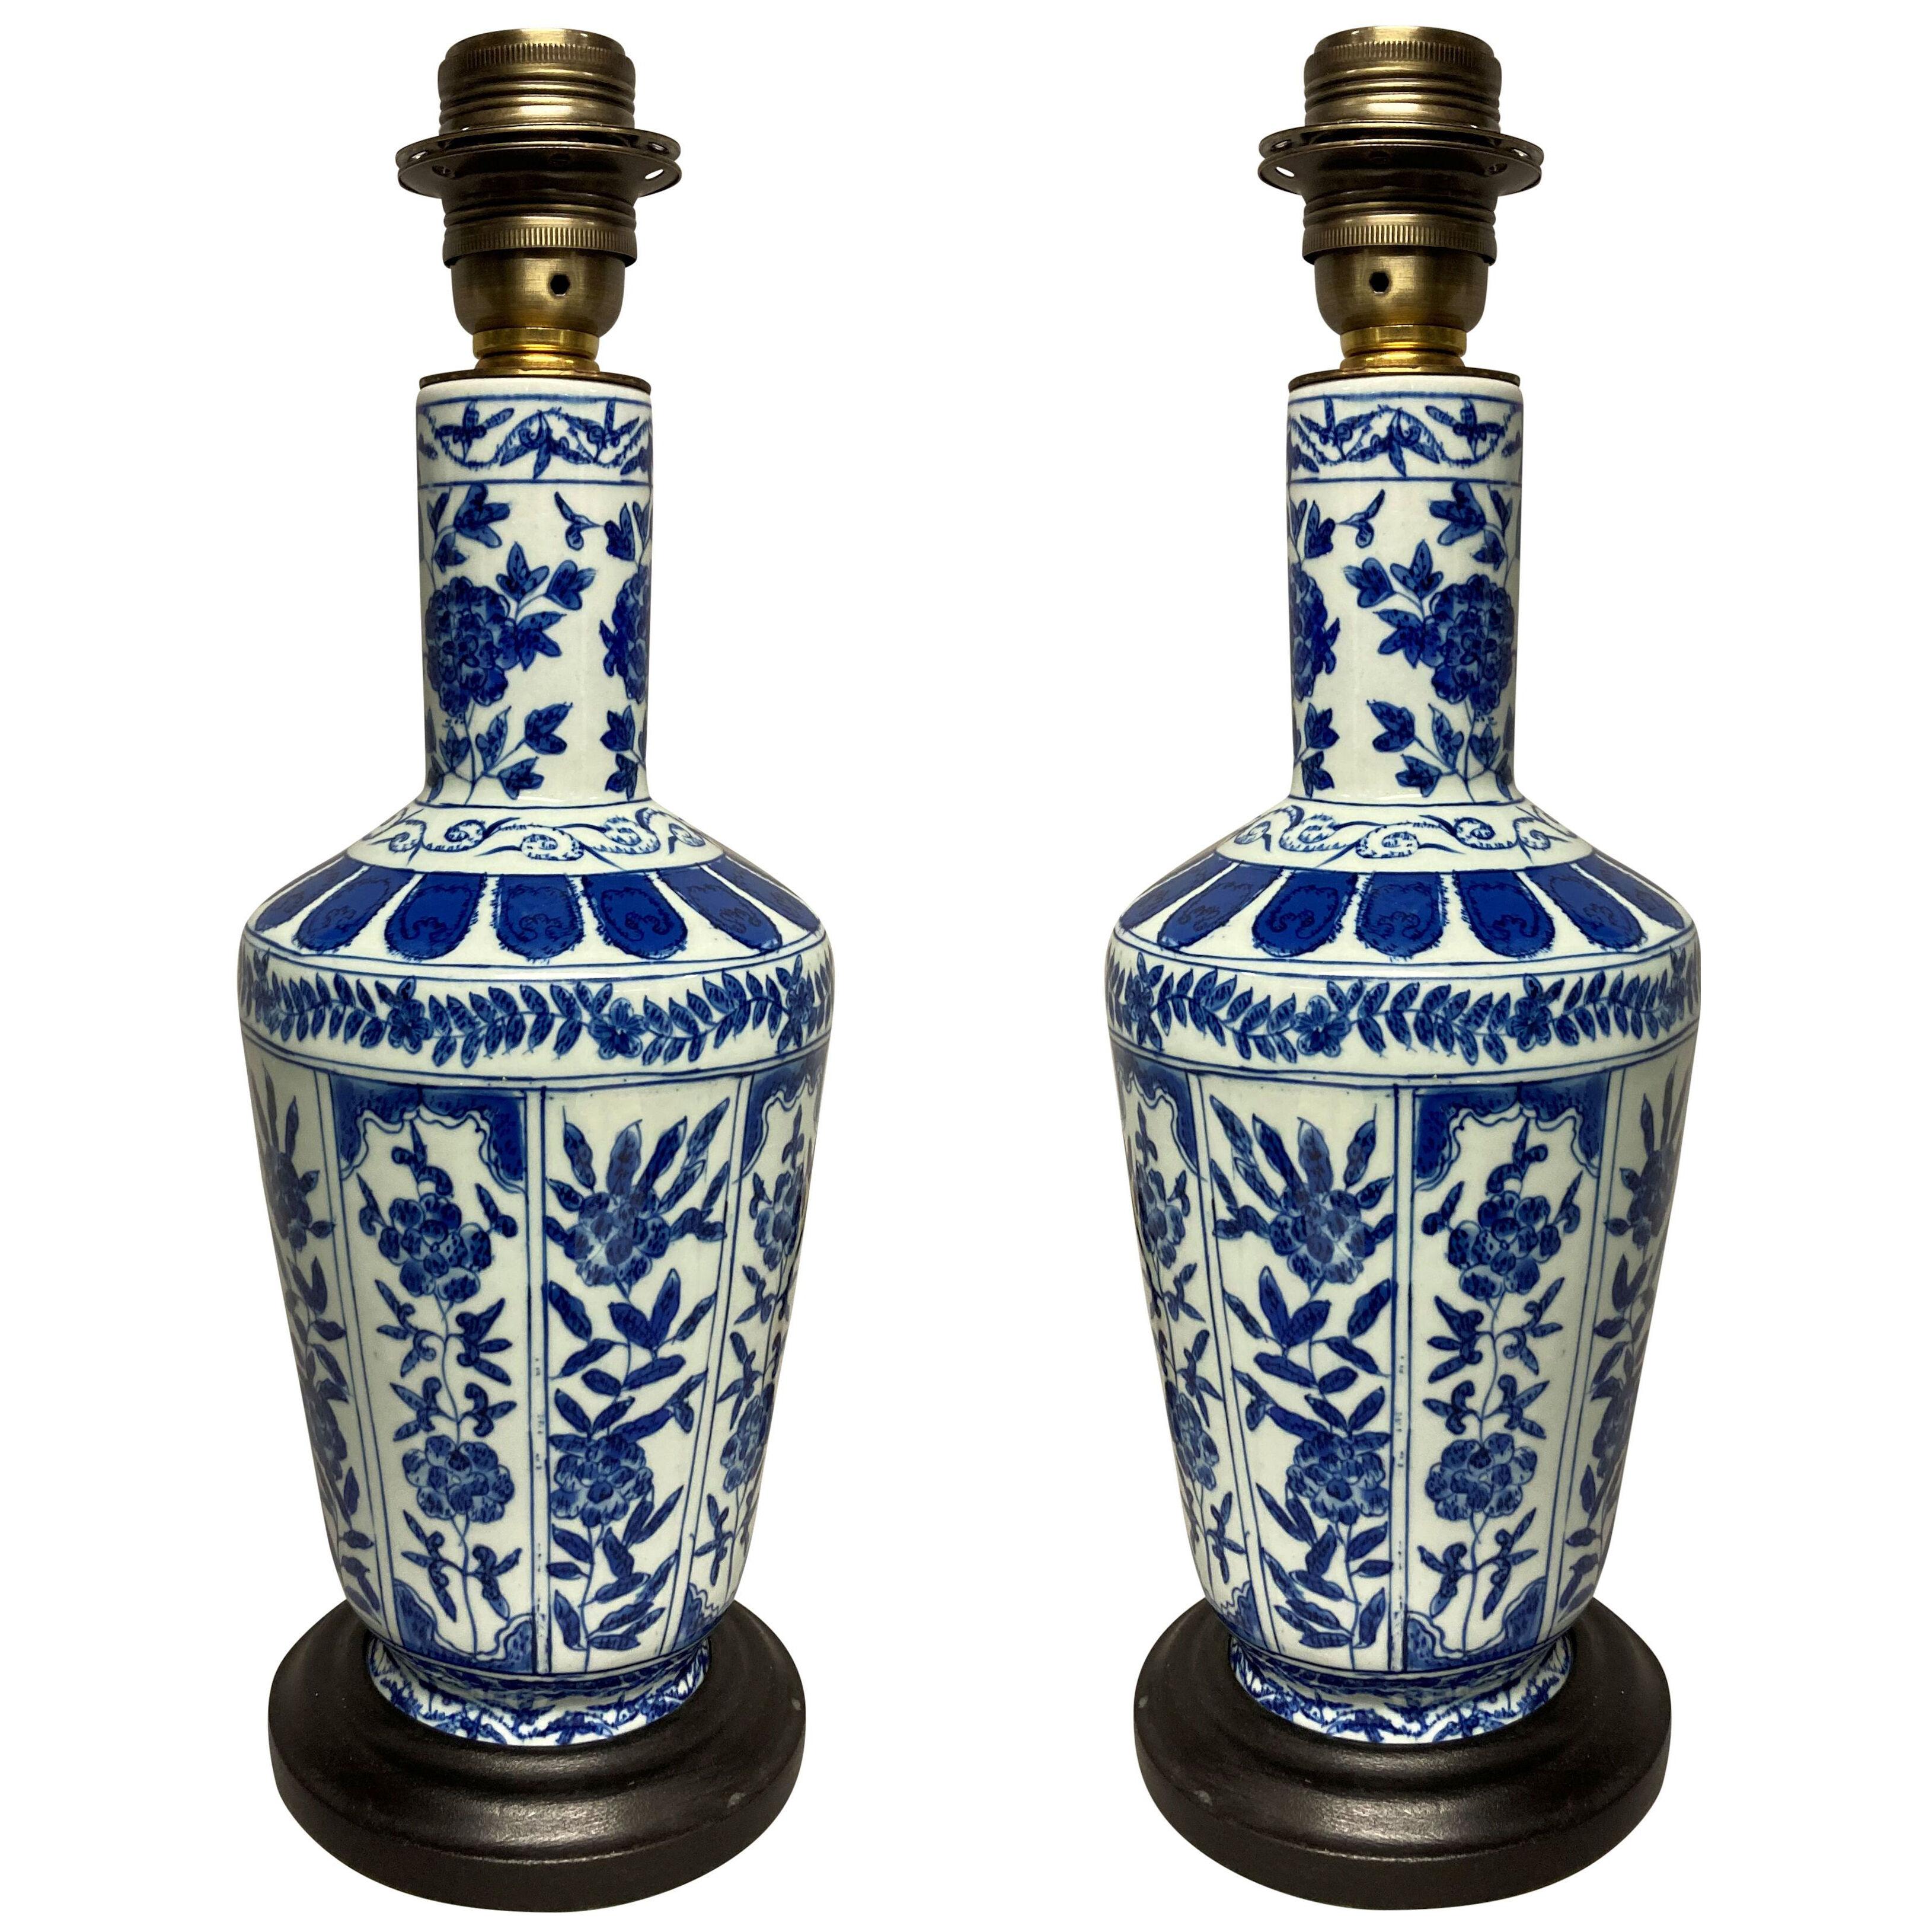 A PAIR OF BLUE & WHITE PERSIAN LAMPS